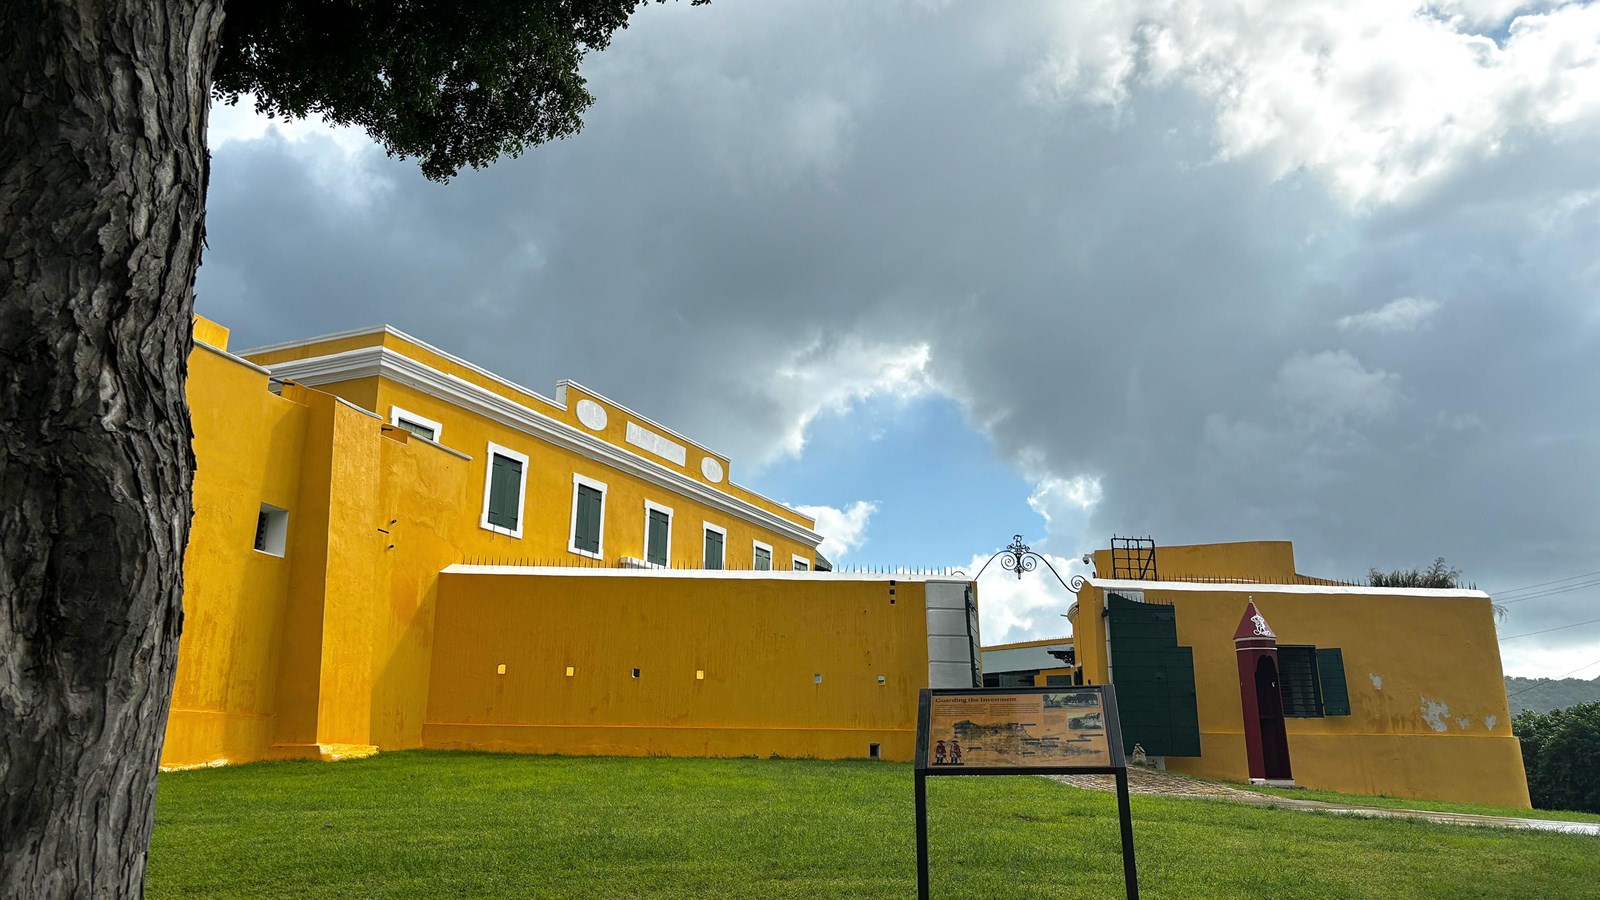 Photo of yellow fort taken from under a tree with coudy sky.